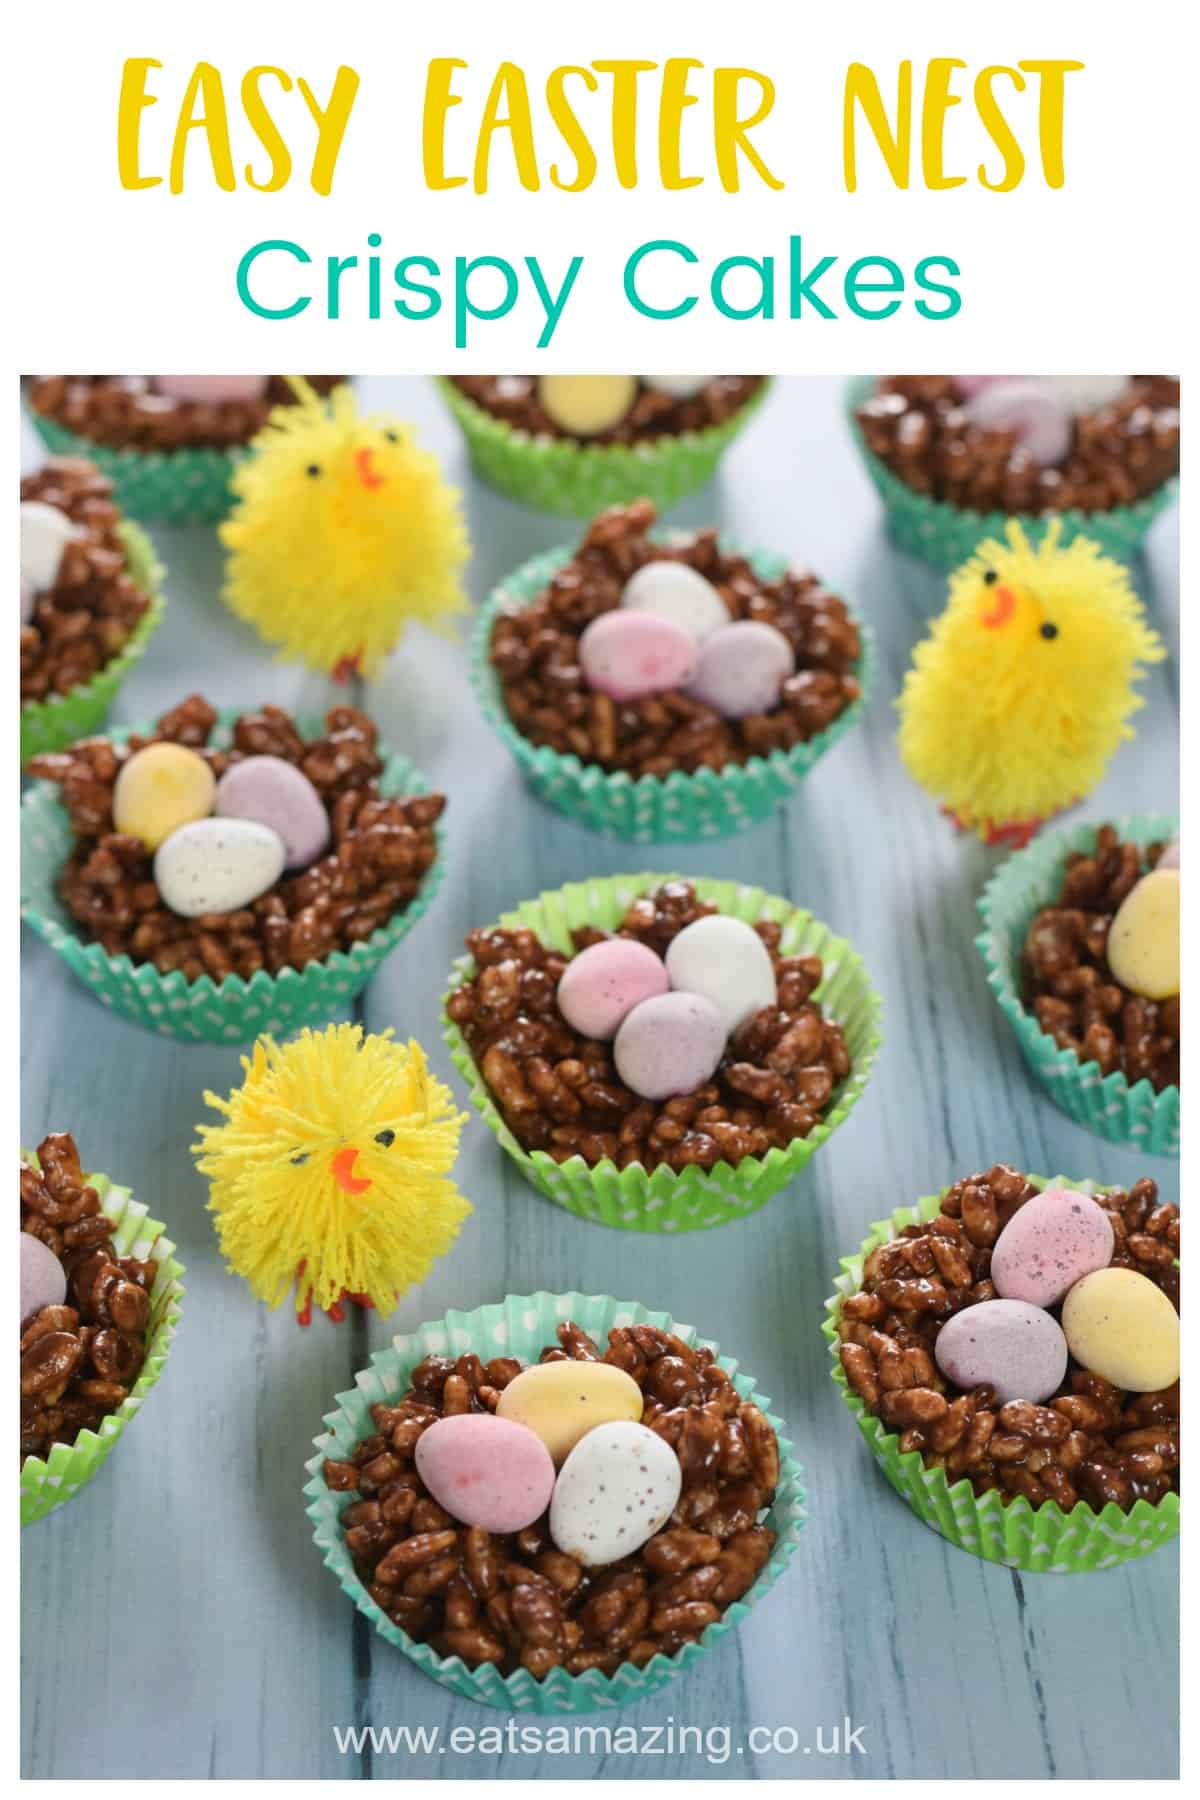 Cute and easy Easter nest crispy cakes recipe - fun Easter recipe for kids with free printable recipe sheet